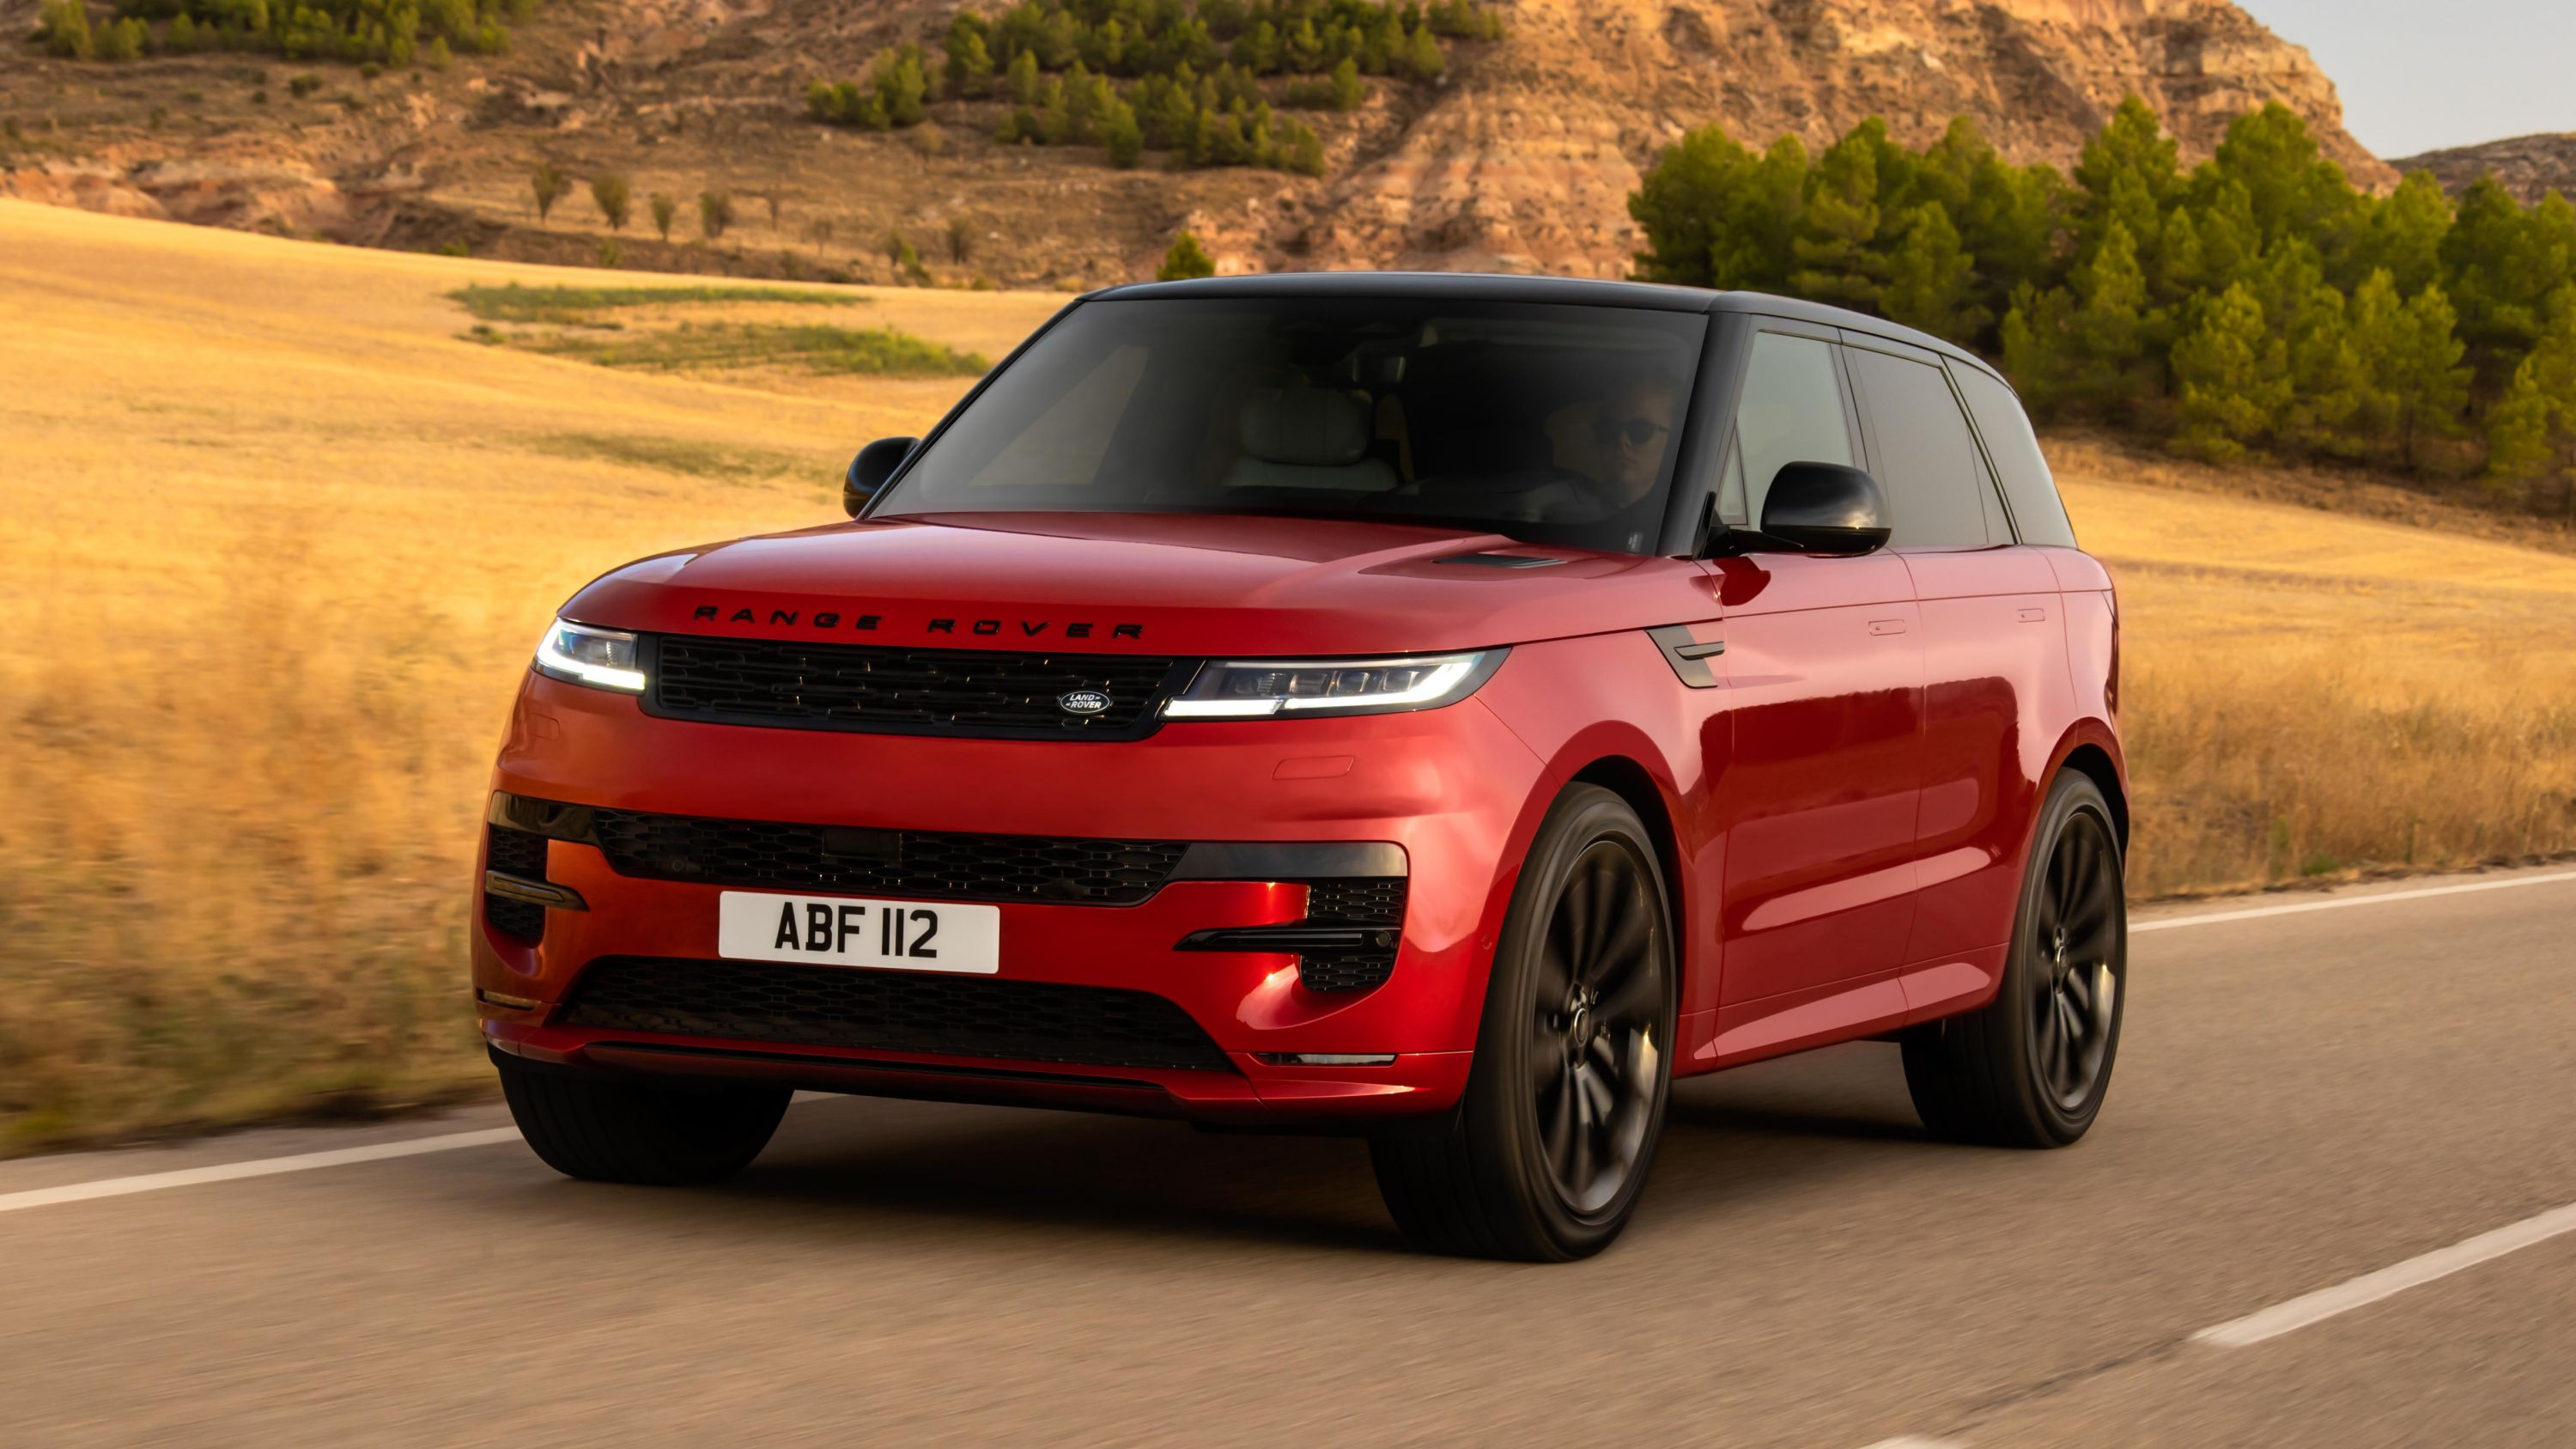 Multiple Land Rover and Range Rover models recalled for potential fire